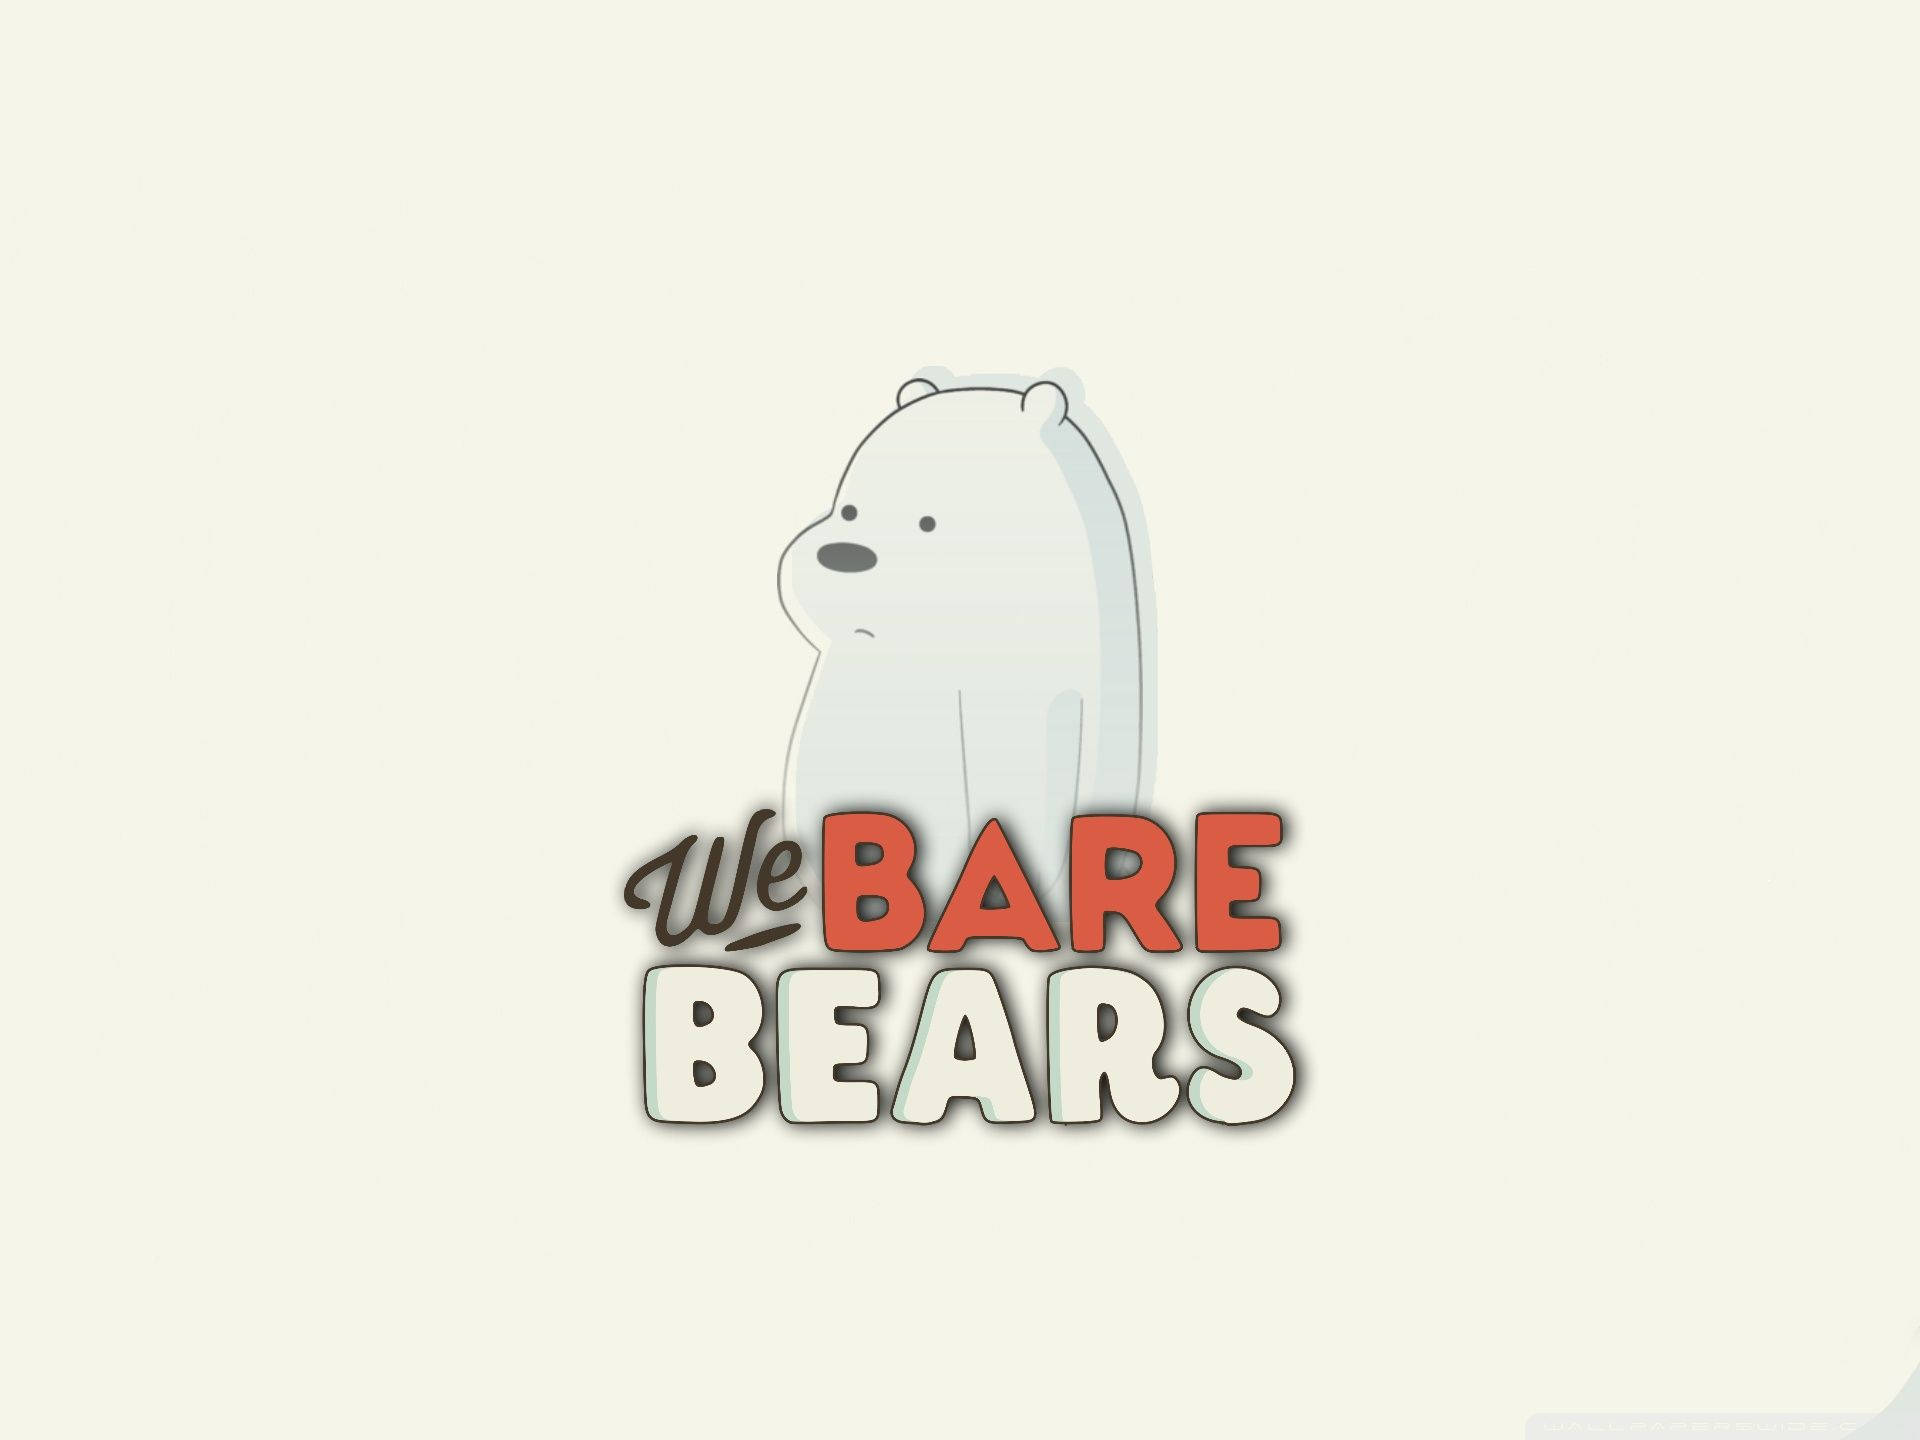 Free Ice Bear Wallpaper Downloads, [100+] Ice Bear Wallpapers for FREE |  